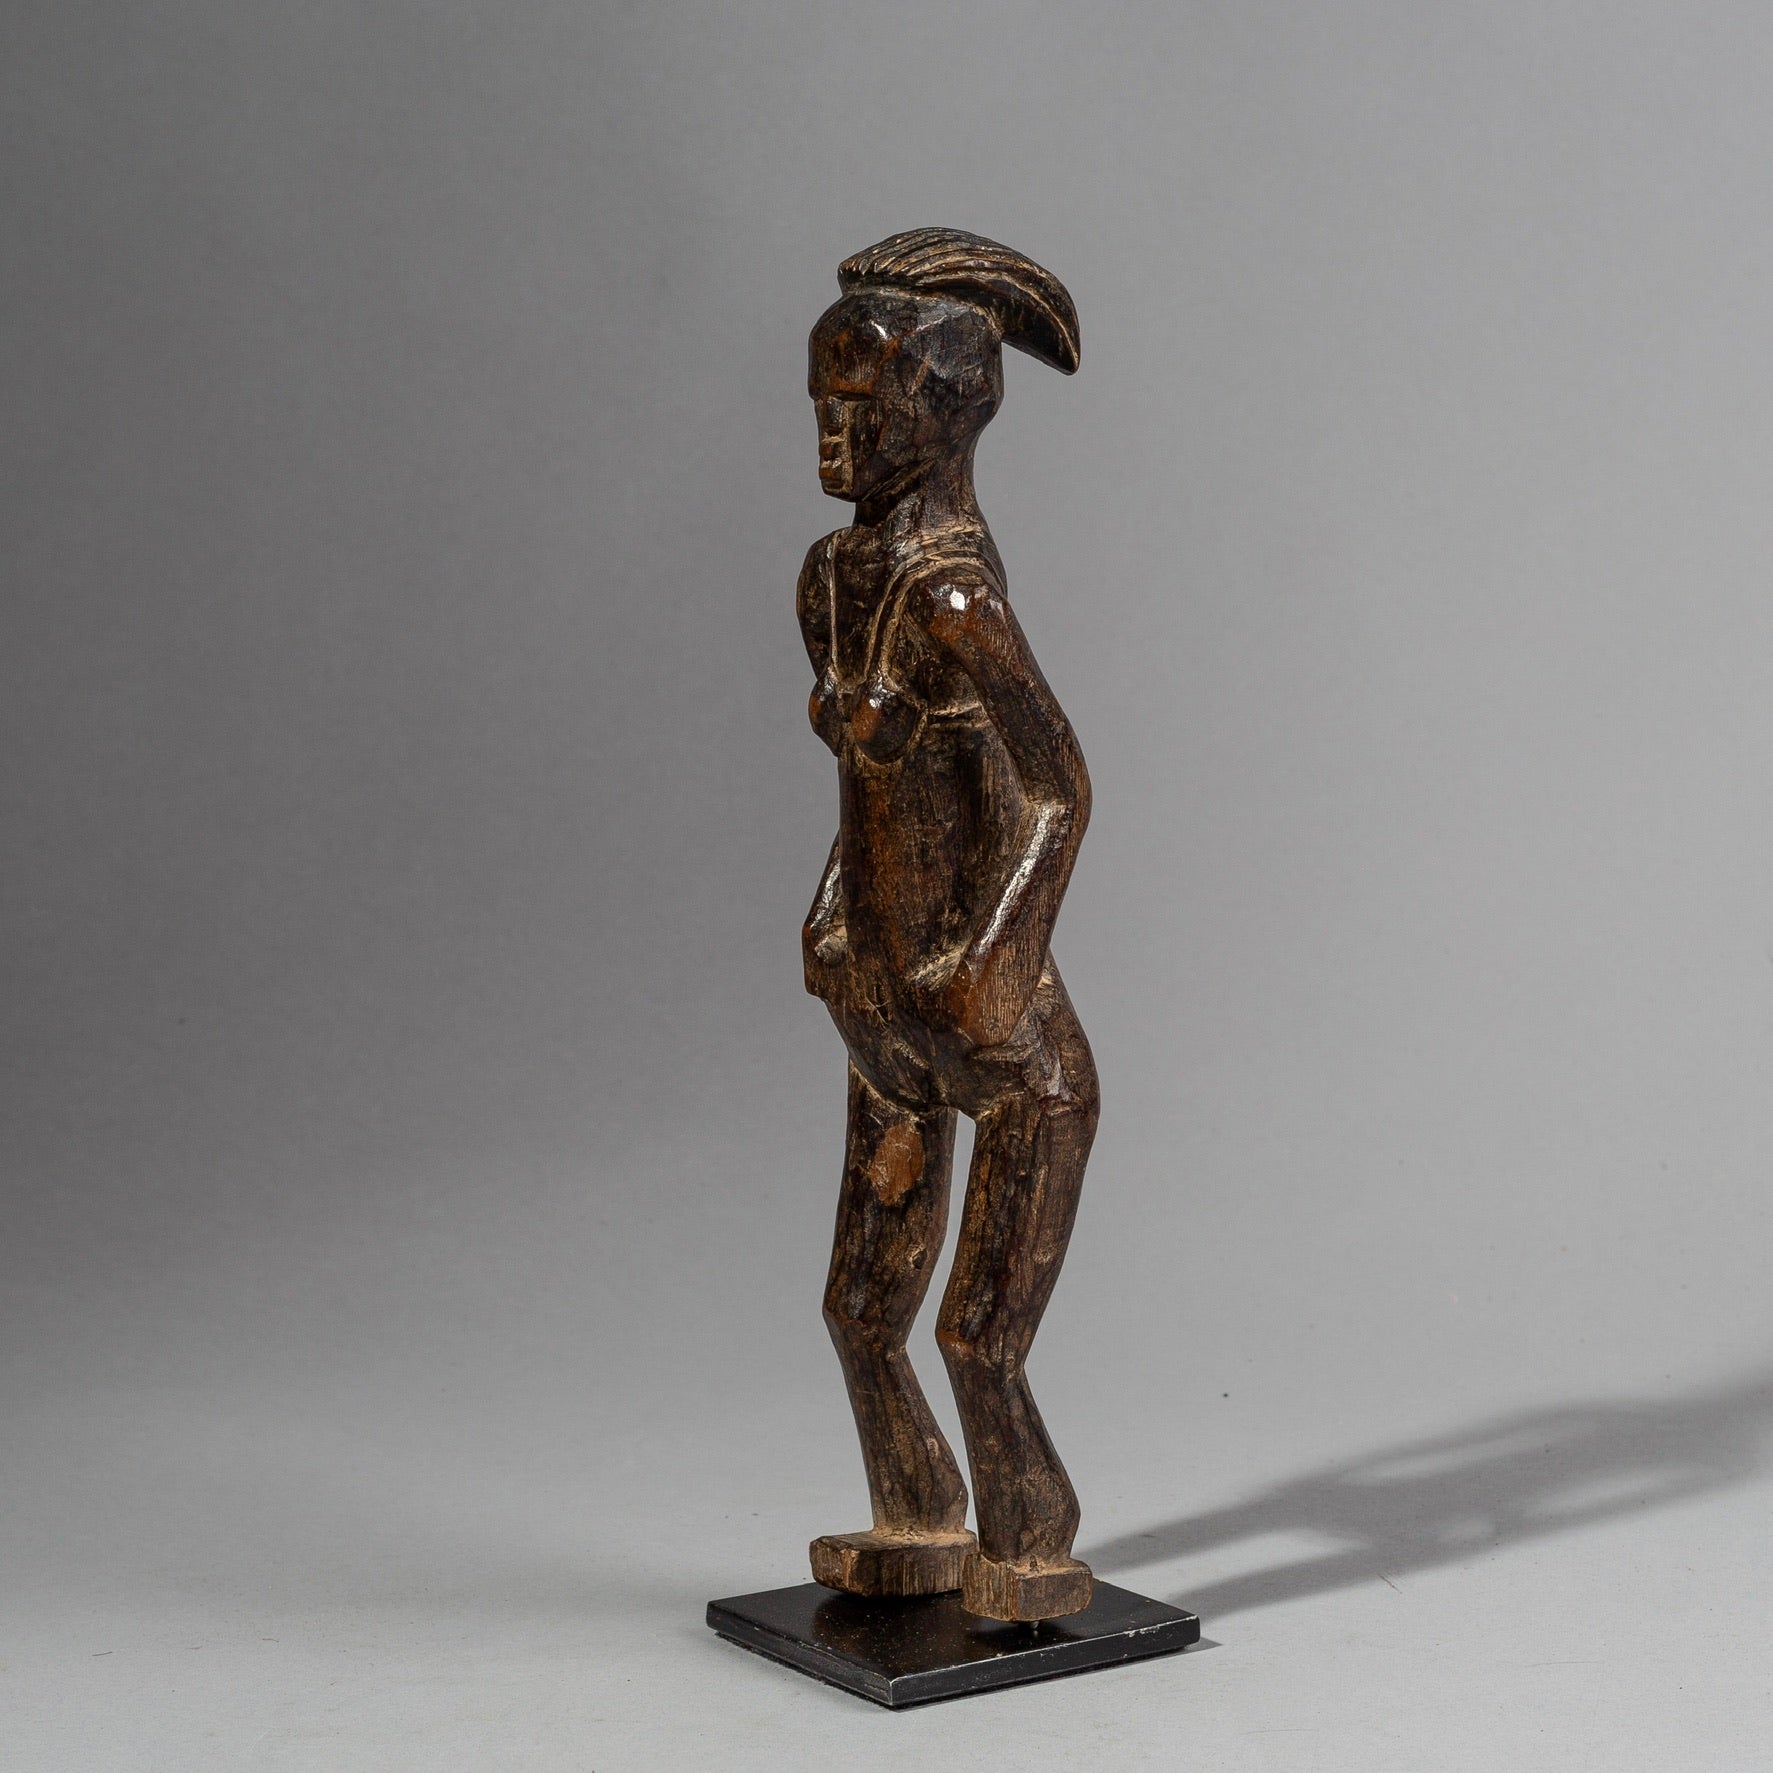 AN ATTRACTIVE ALTAR FIGURE FROM AGNI TRIBE OF THE IVORY COAST (No 1535)